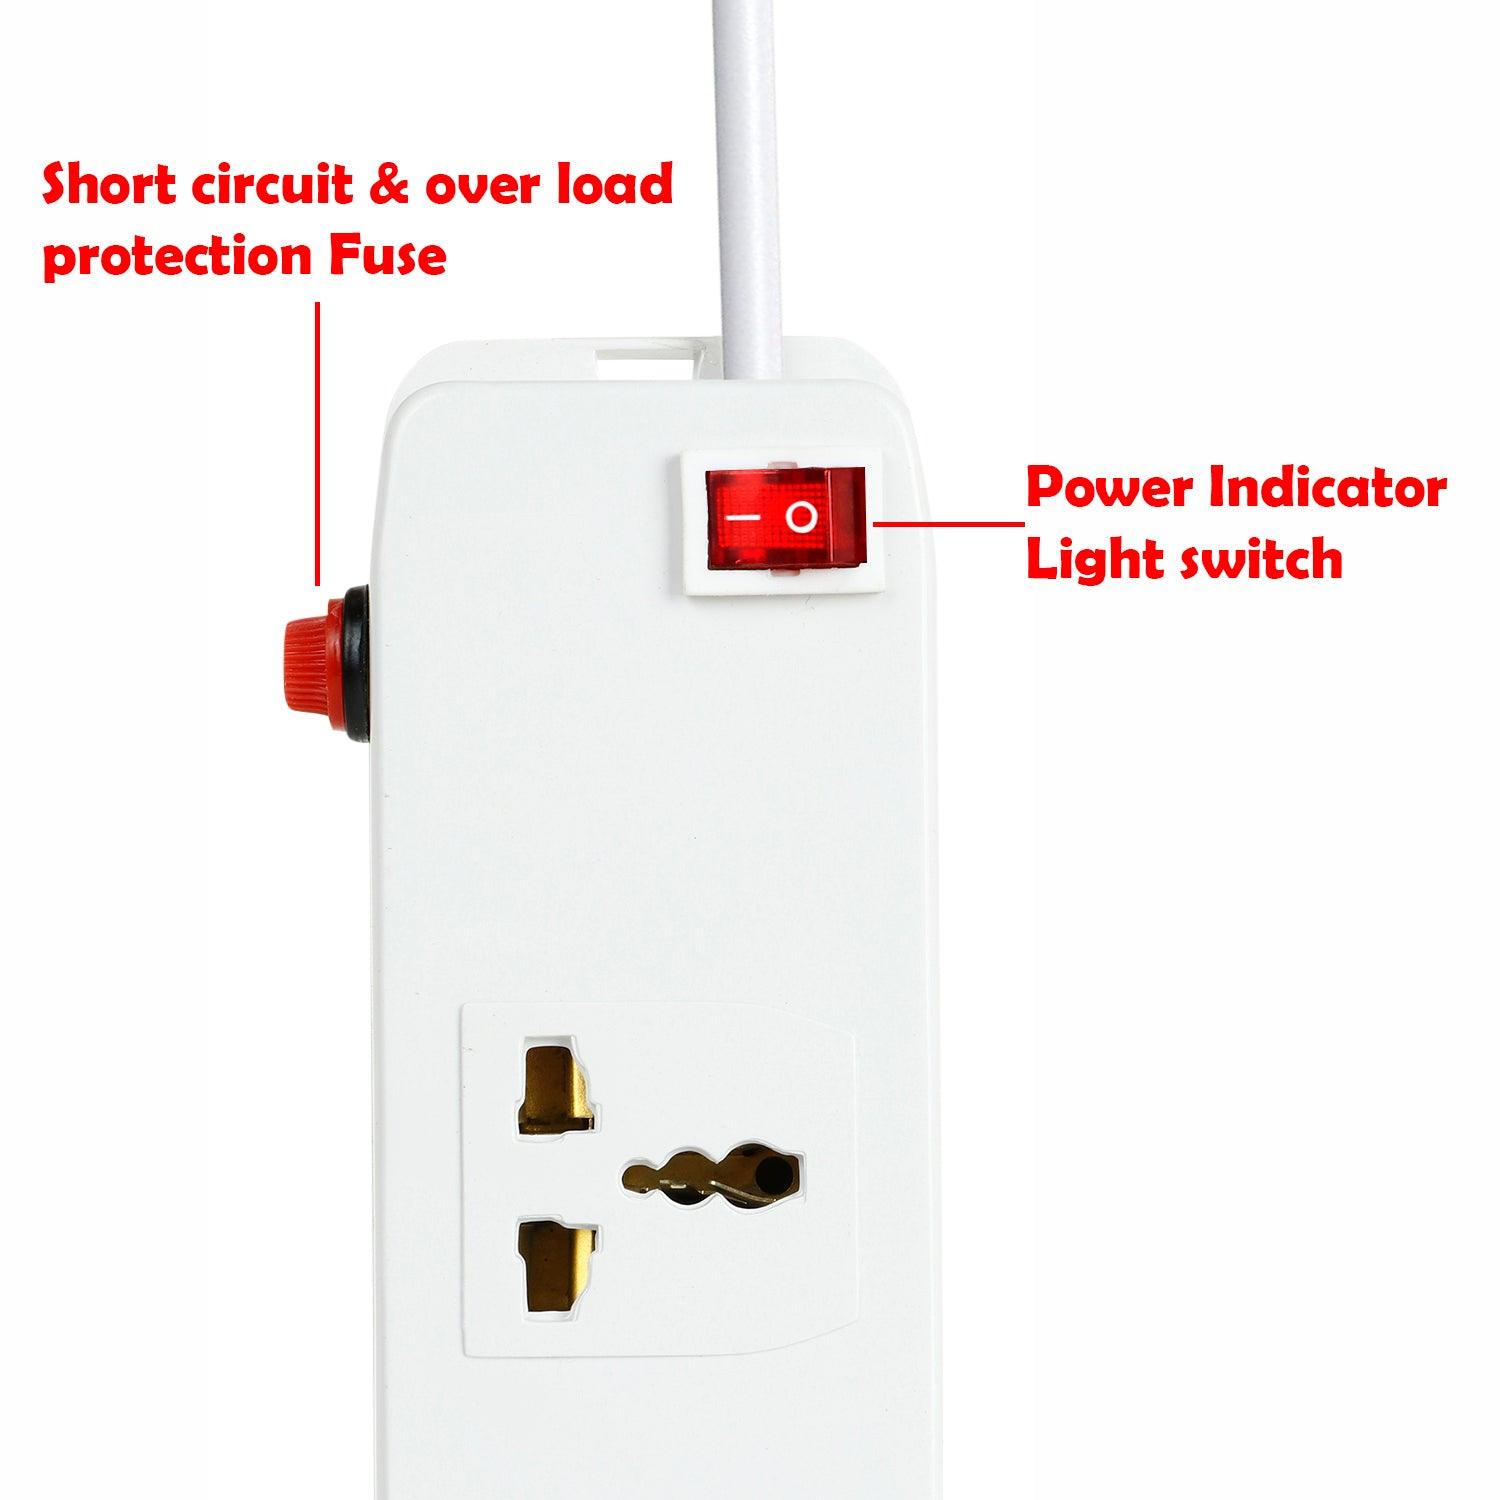 FEDUS Surge Protectors Spike Buster Extension Boards with Switch and Long Wire for Computer (4M/13F) - FEDUS